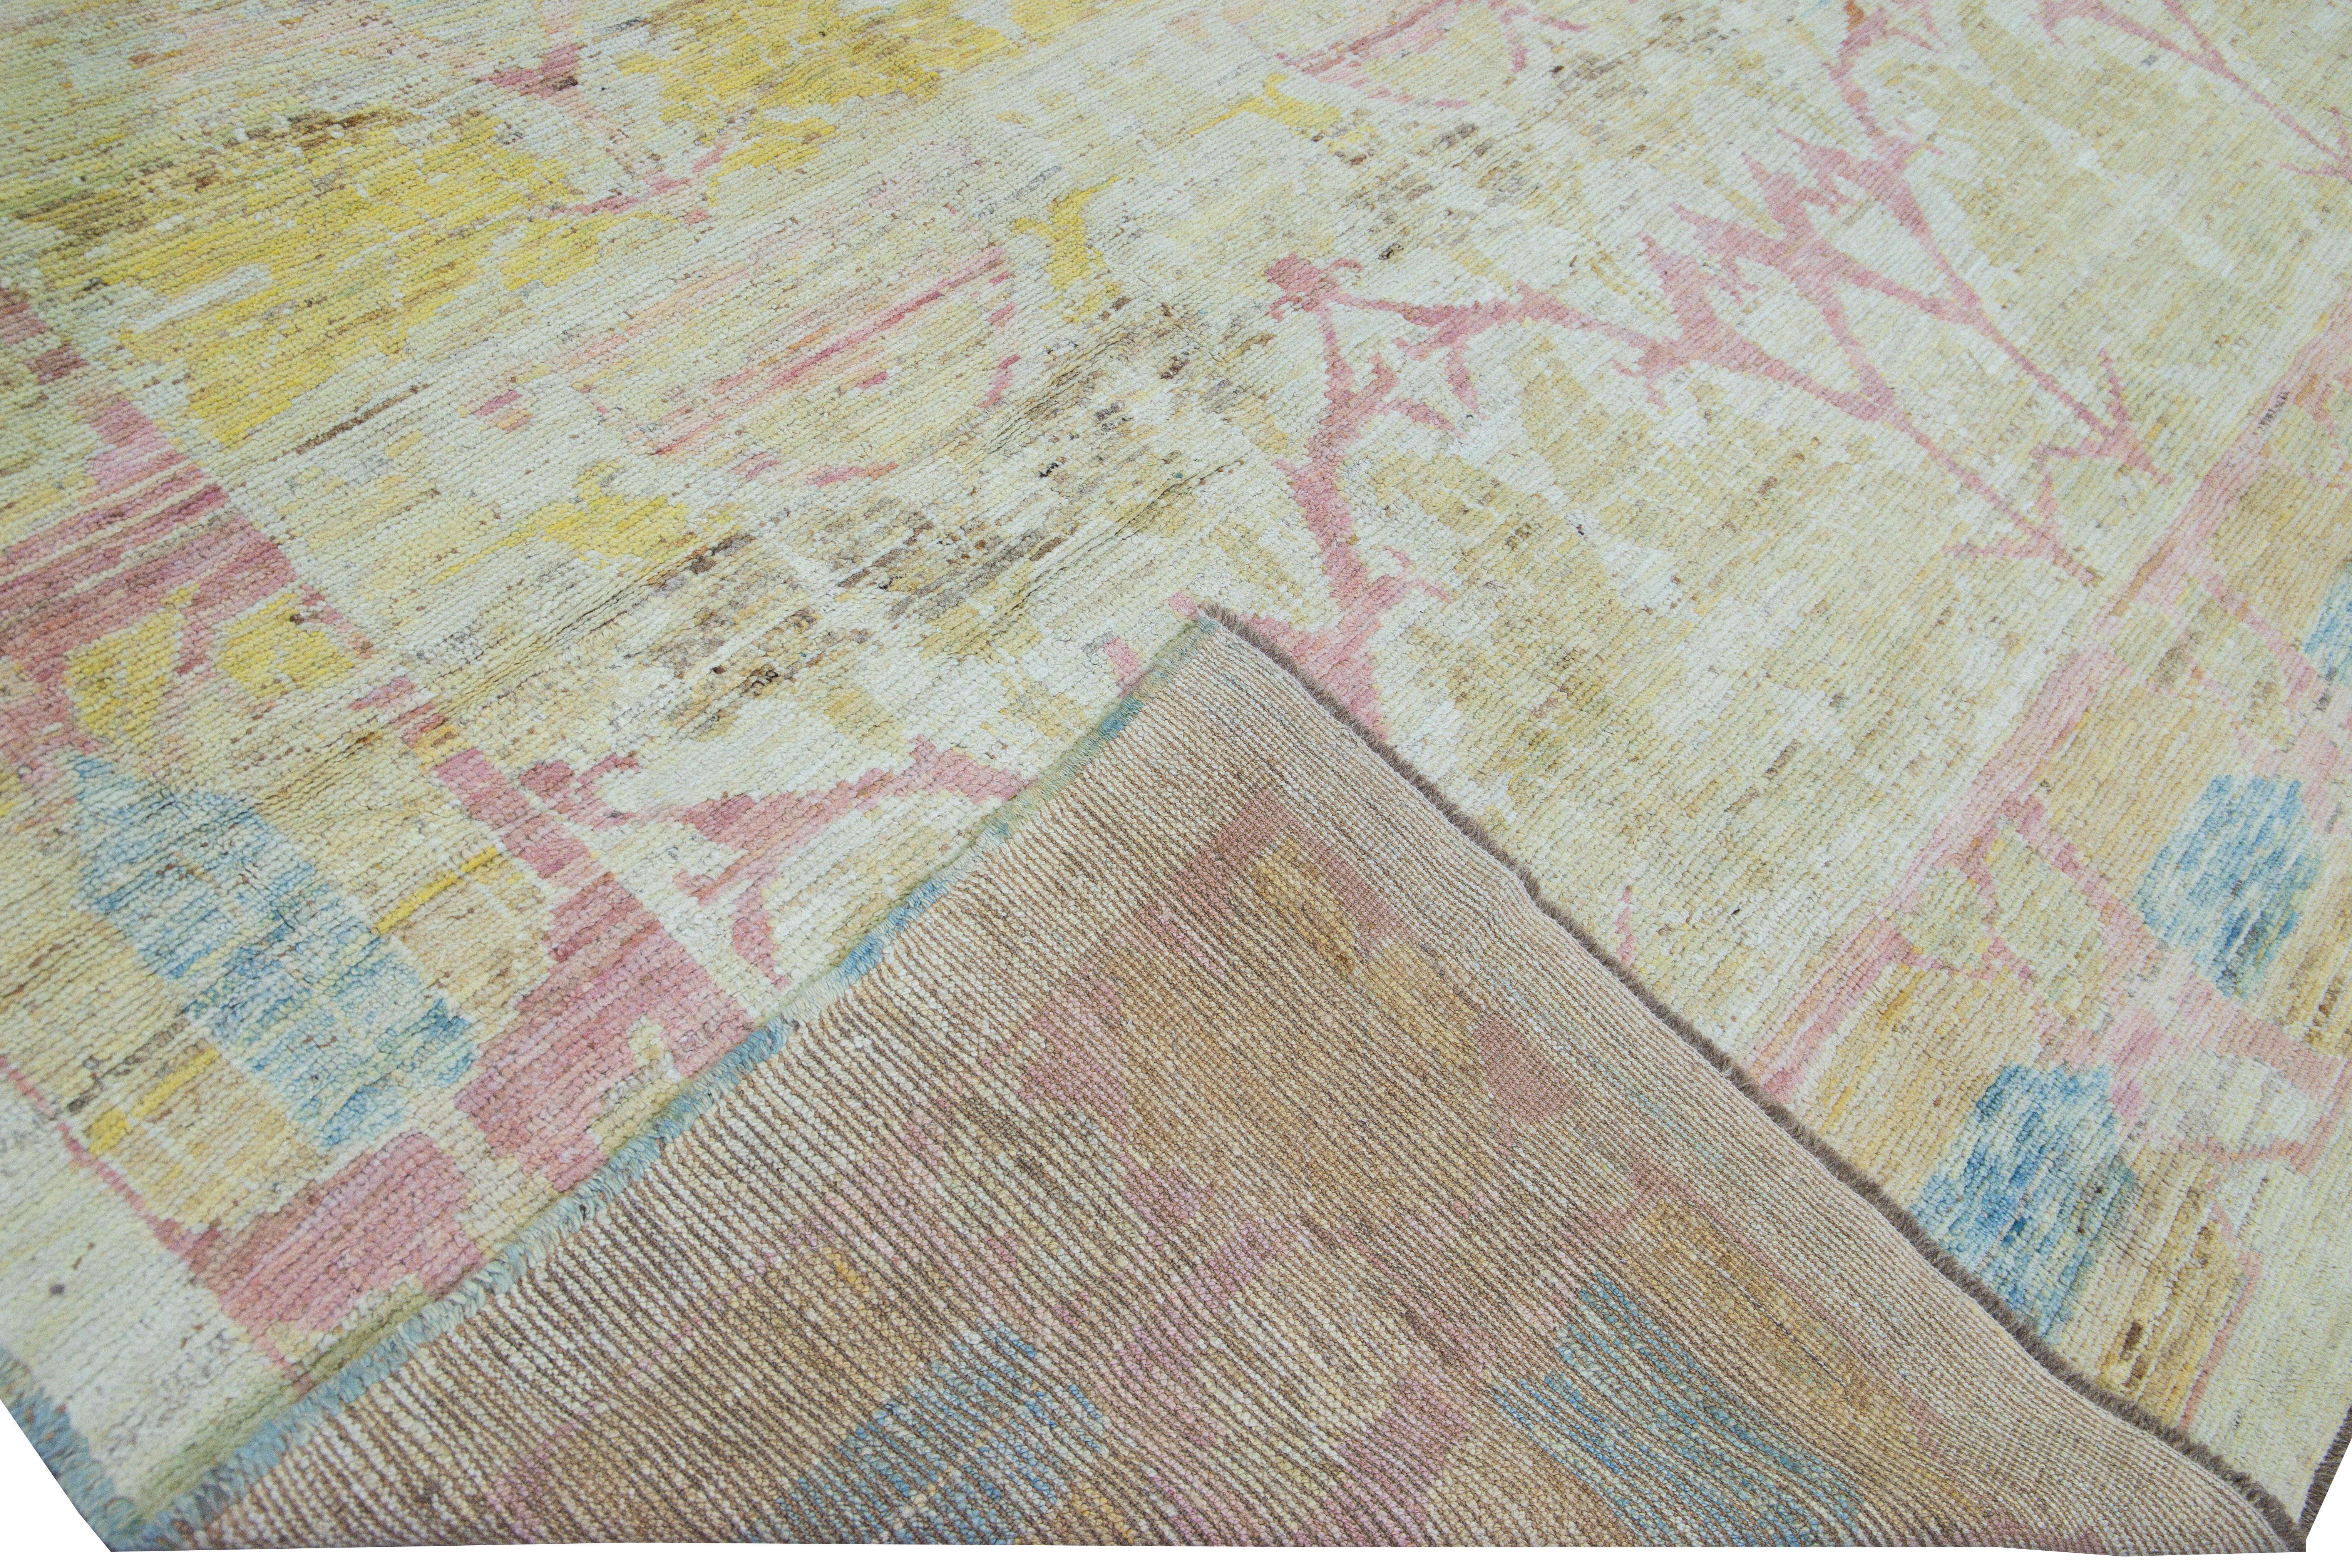 Beautiful Modern Oushak hand-knotted wool rug with a yellow gradient field. This Oushak rug has blue, pink, and ivory accents all over a gorgeous geometric floral pattern design. 

This rug measures: 11' x 15'2